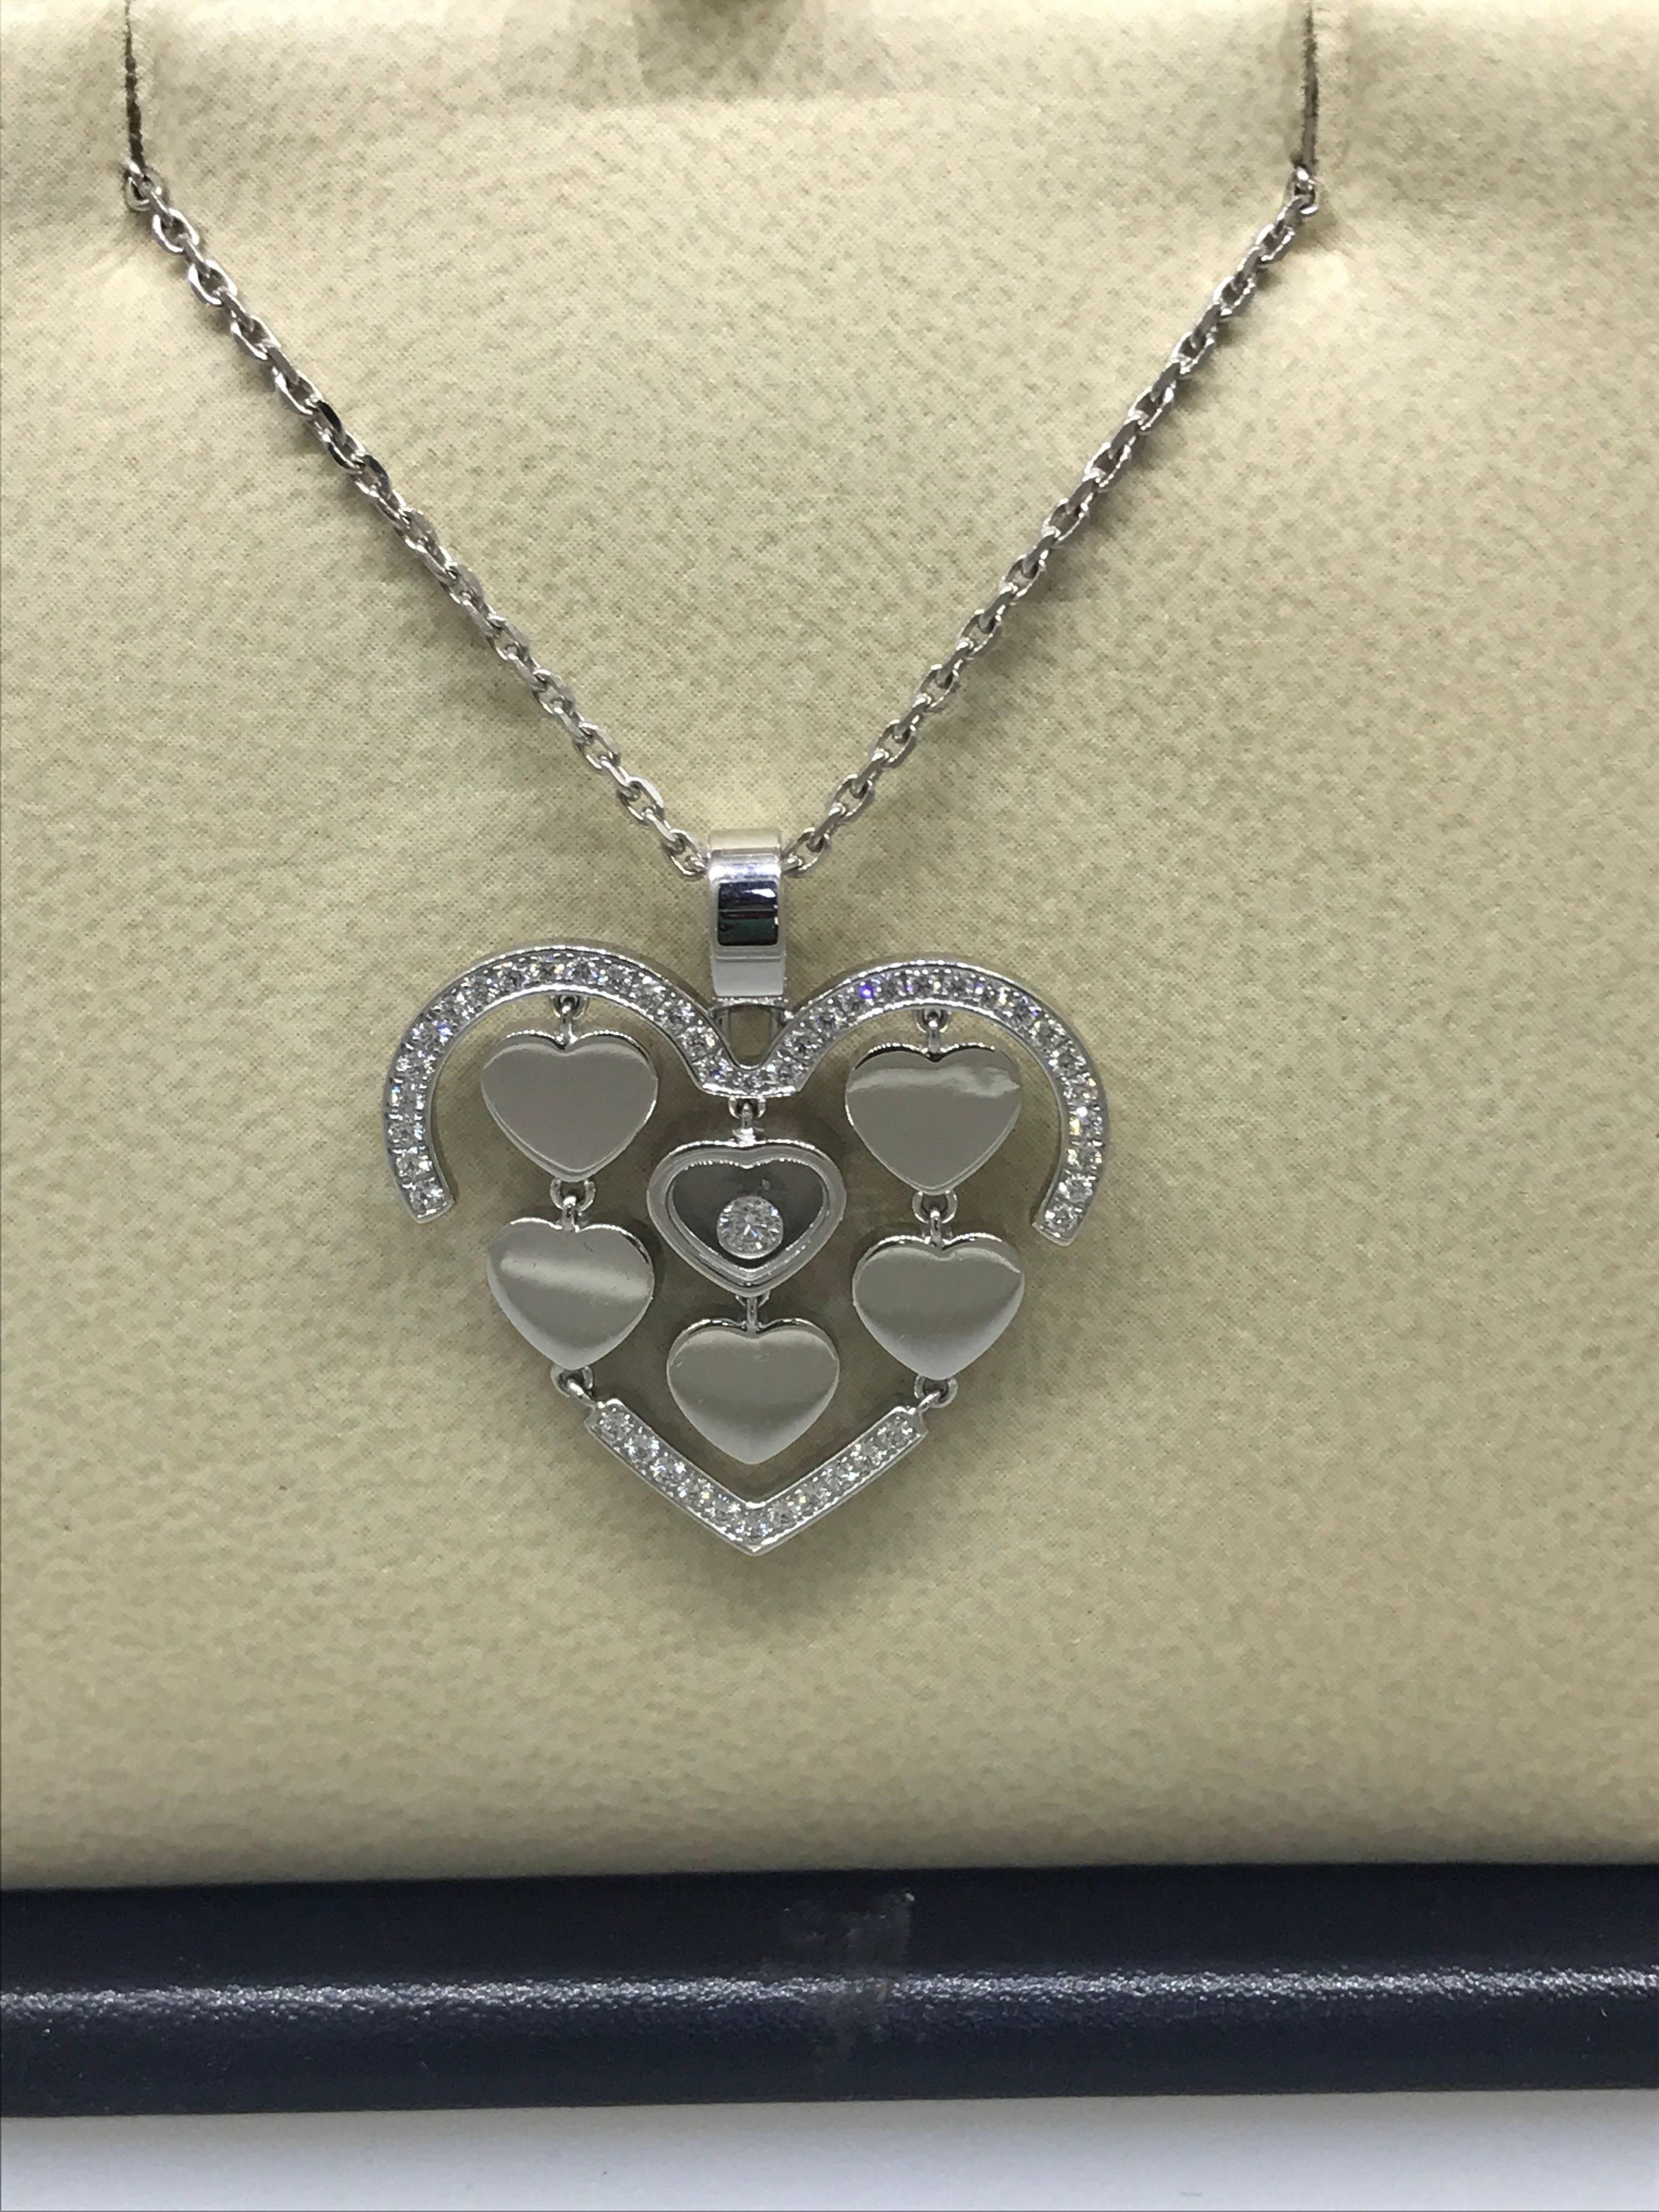 Chopard Amore Hearts Pendant / Necklace

Model number 79/7219-1002

100% Authentic

Brand New

Comes with original Chopard box, certificate of authenticity and warranty and jewels manual

18 Karat White Gold (10.8gr)

44 Diamonds on the pendant (.22